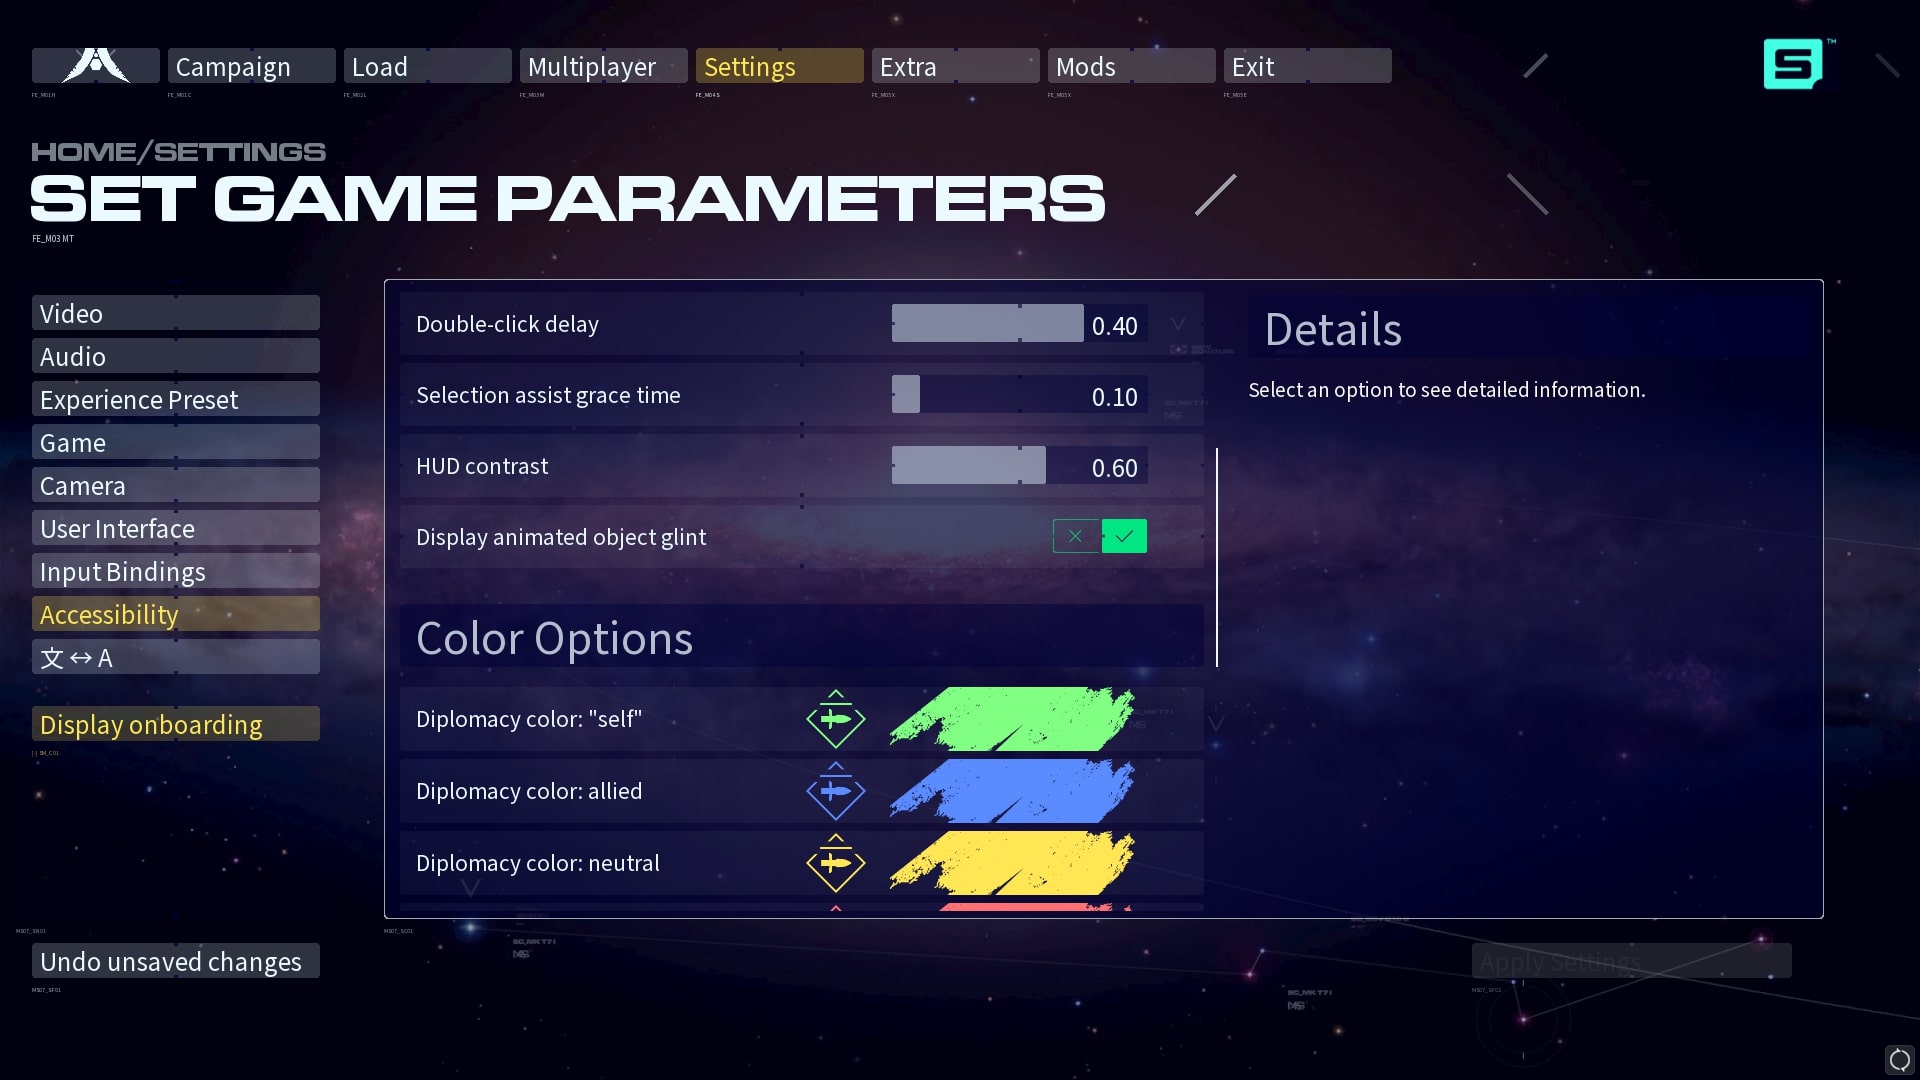 A second screenshow showing the accessibility menu in Homeworld 3.